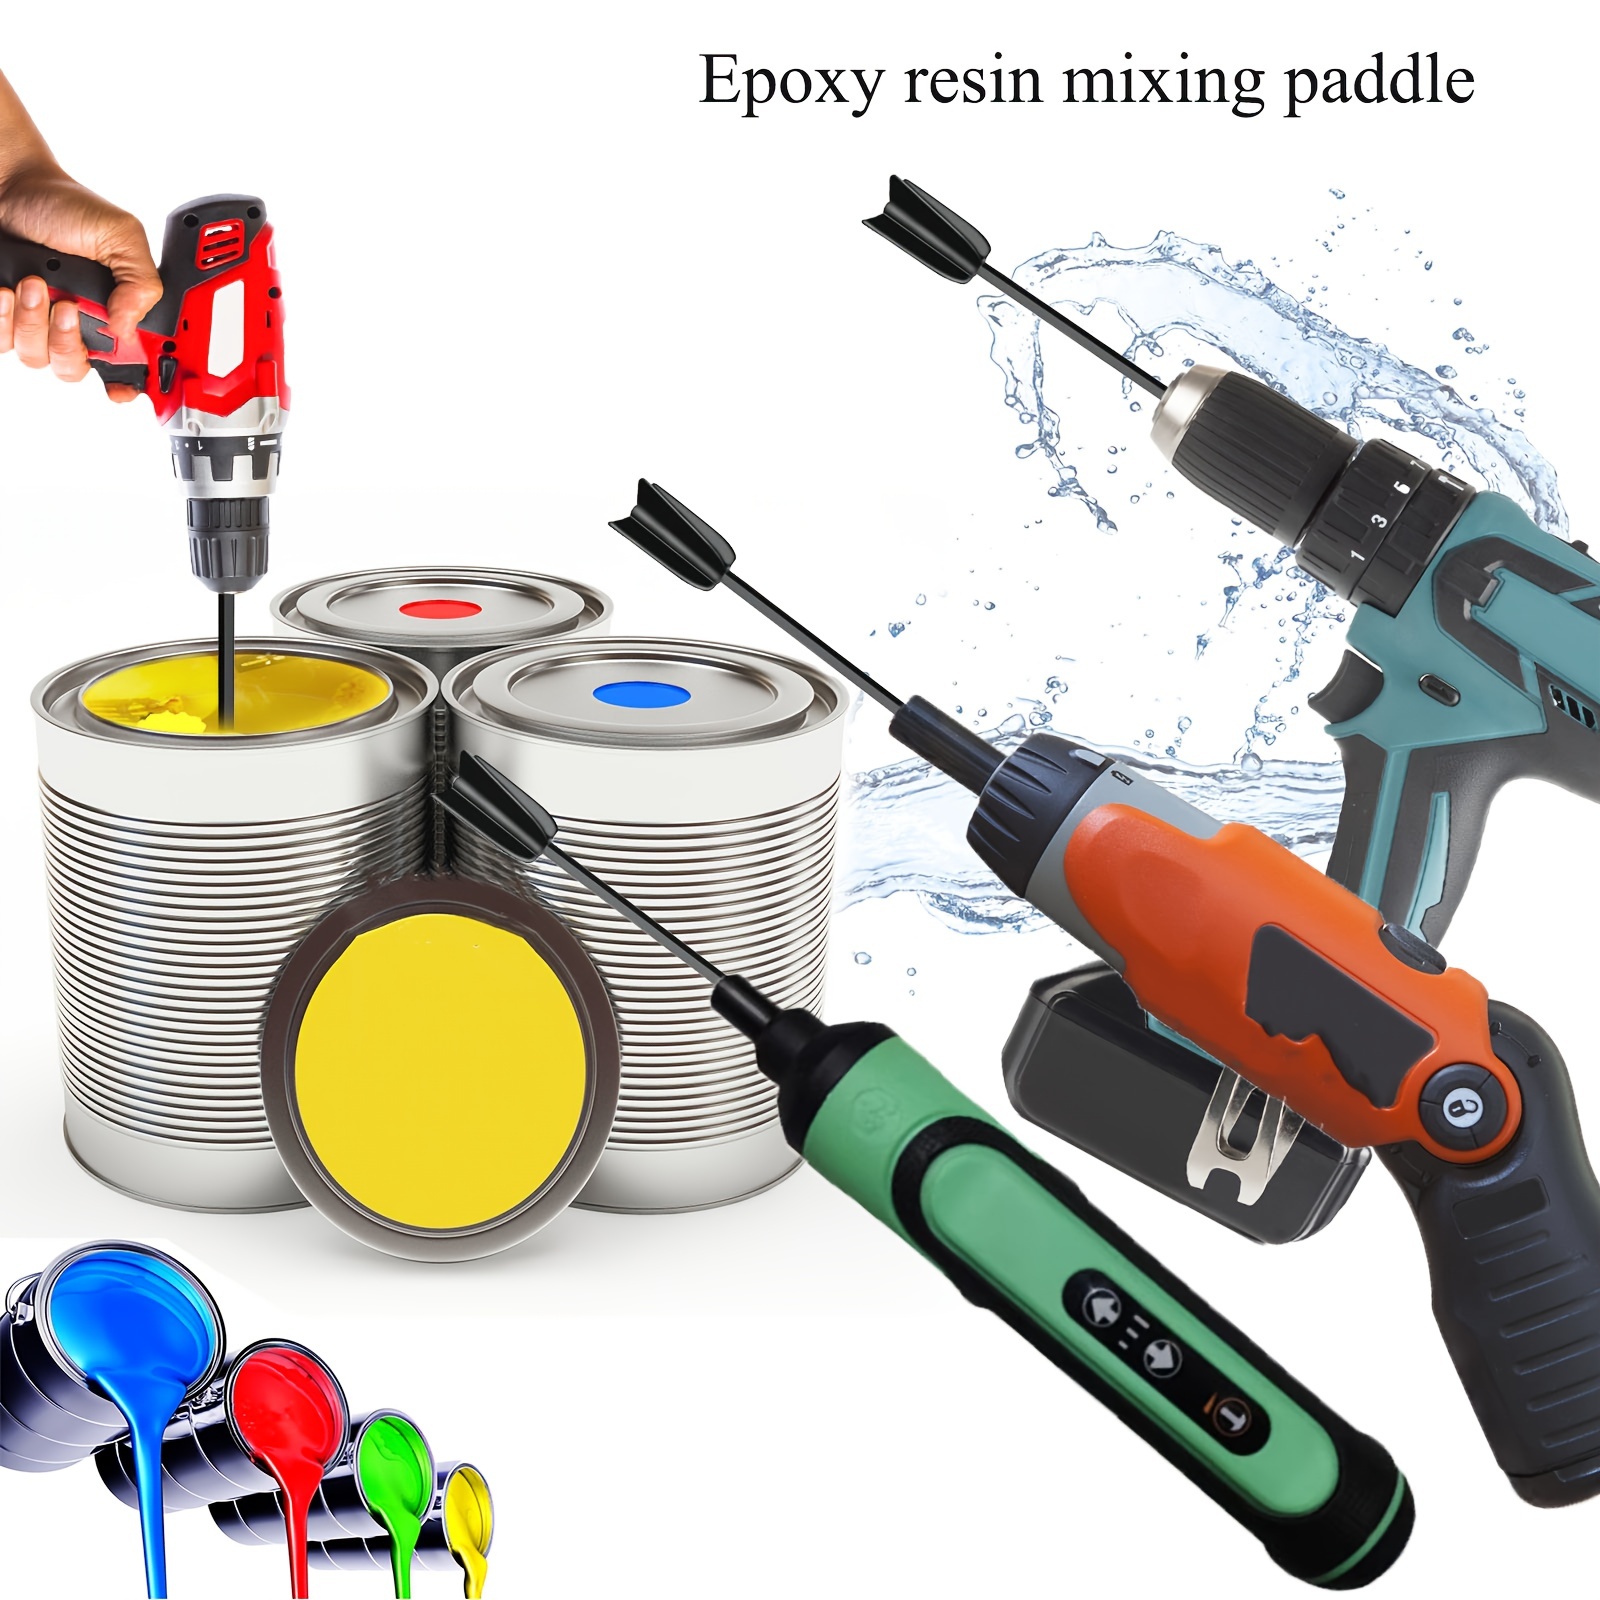 Generic Resin Mixer Paddles, Misowin Epoxy Mixer Attachment, Reusable Paint  Mixer for Drill, Paint Stirrer Drill Attachment for Resin